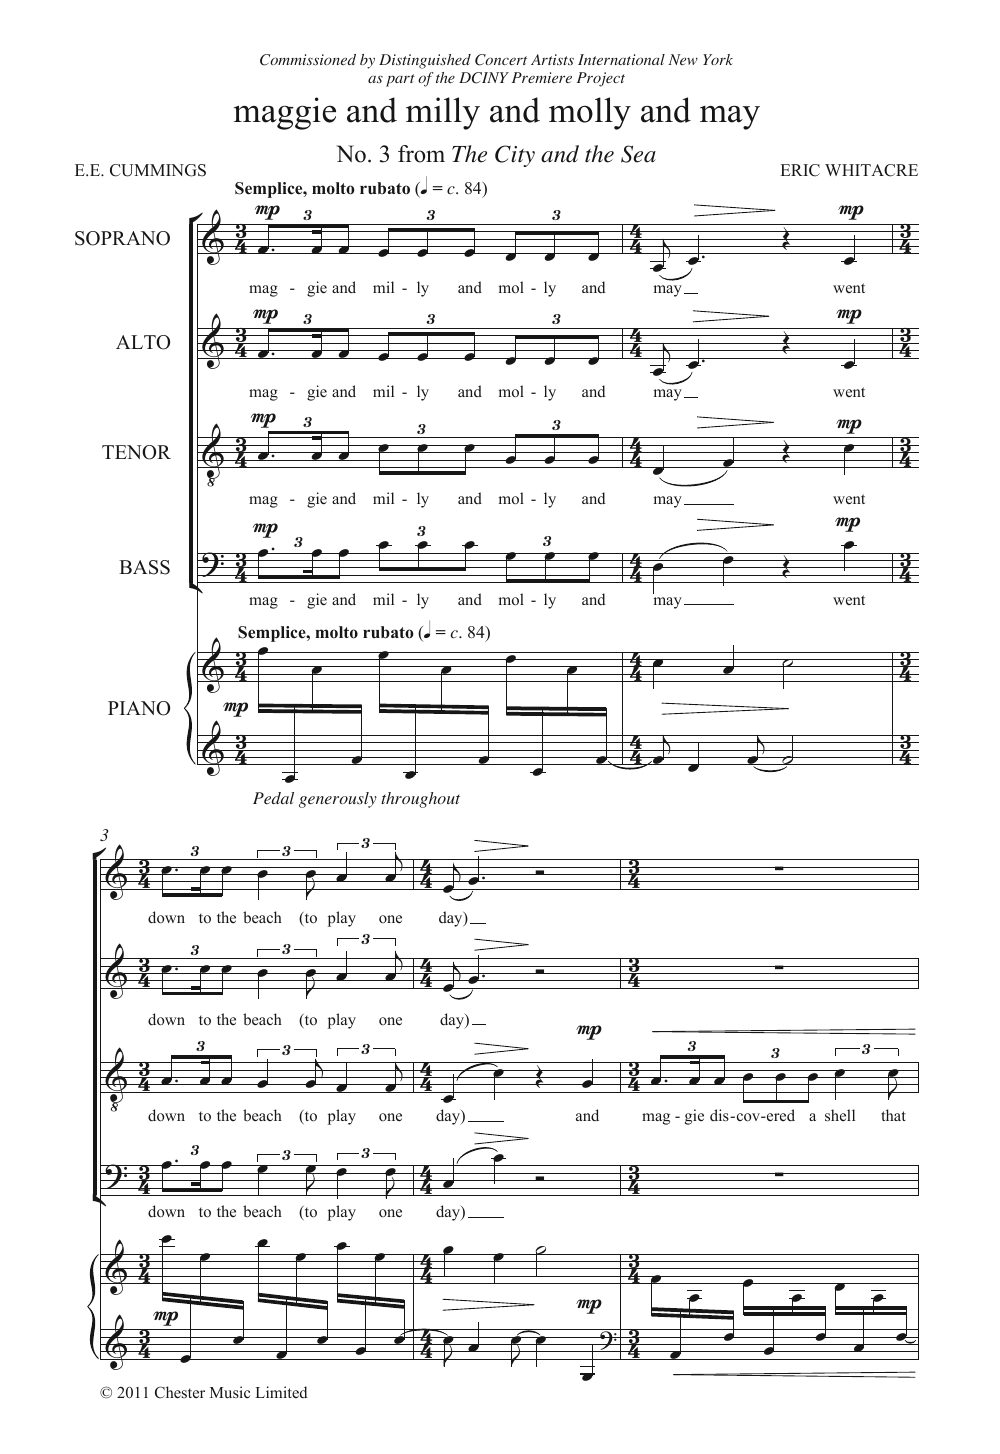 Download Eric Whitacre Maggie And Milly And Molly And May (Fro Sheet Music